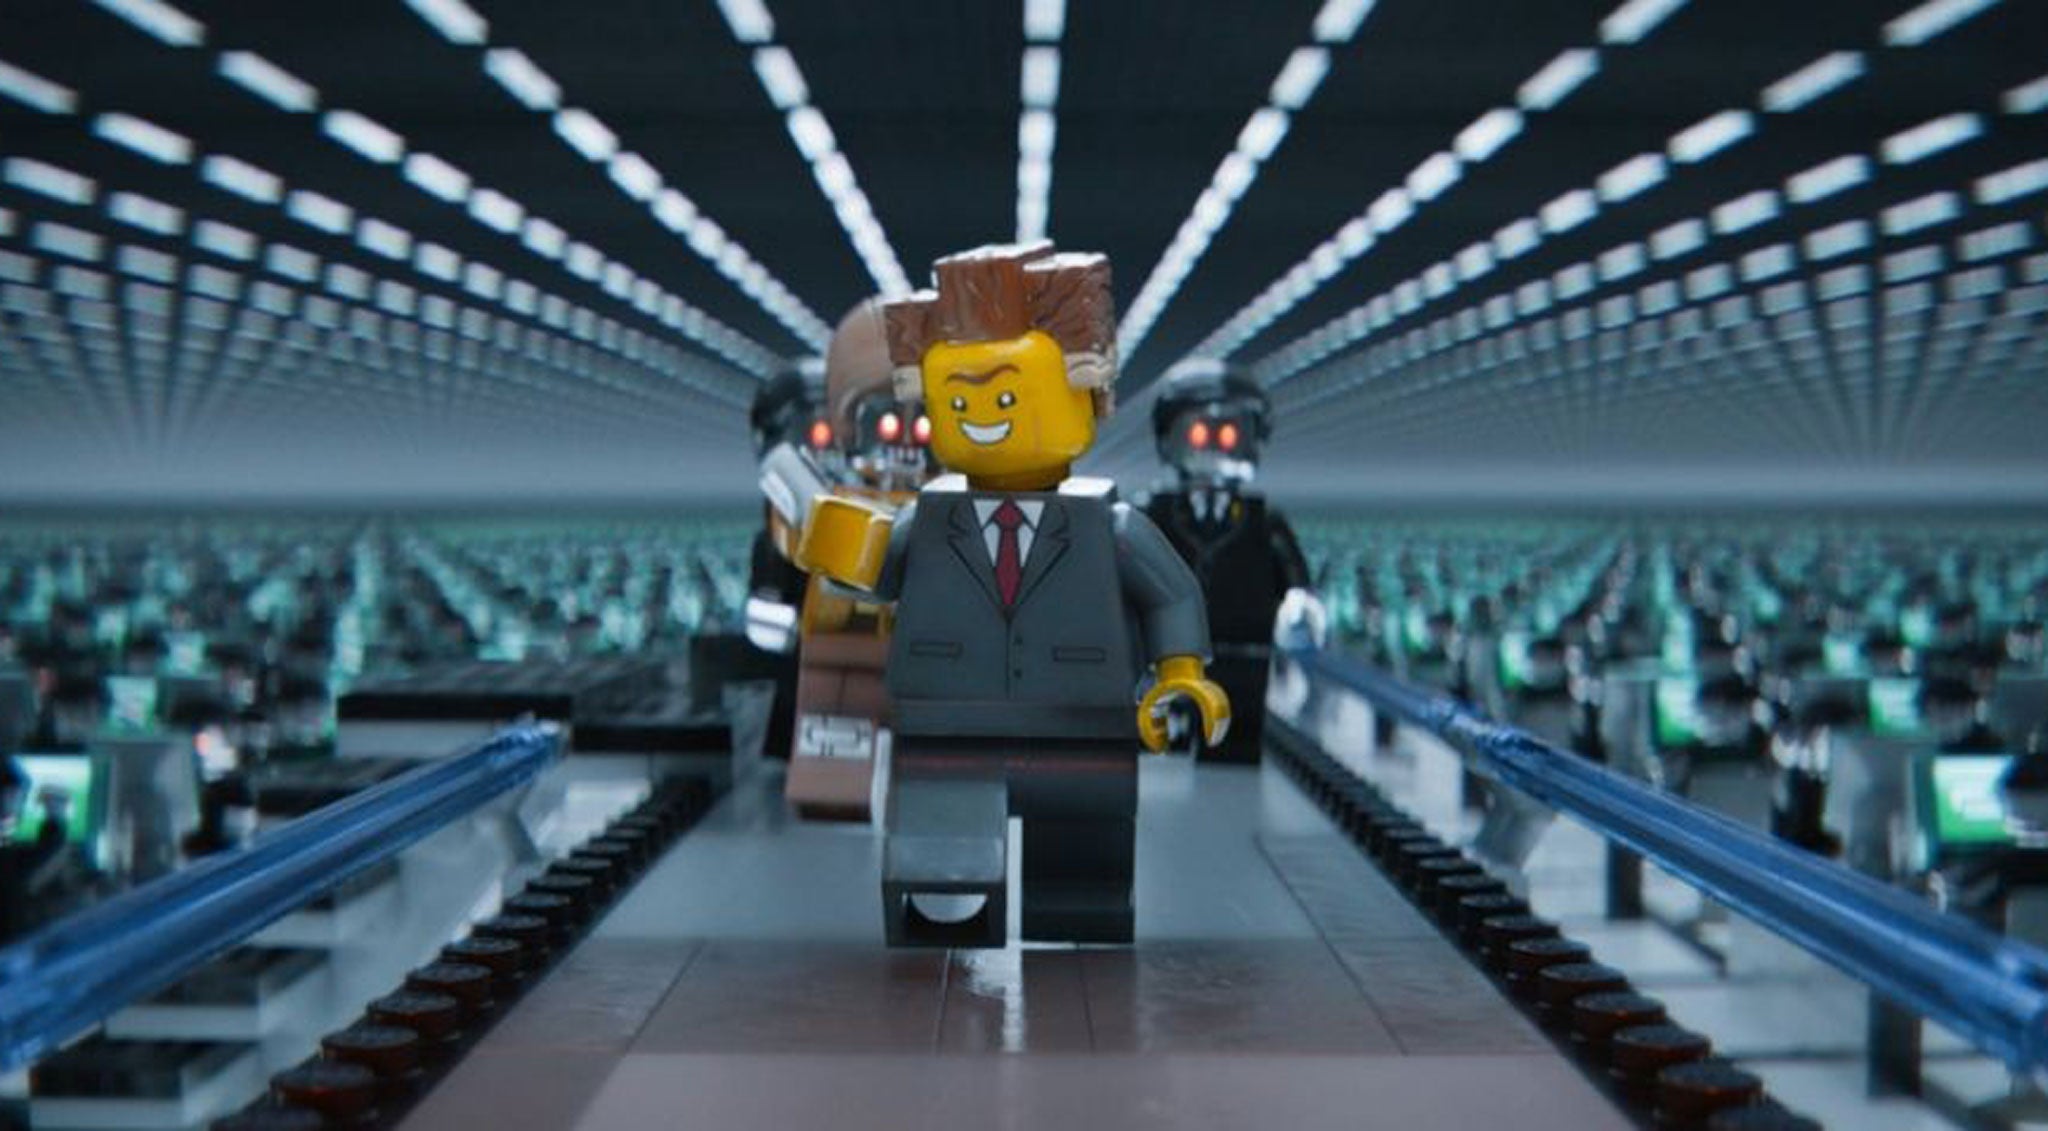 'The Lego Movie' has been one of the box office hits of 2014